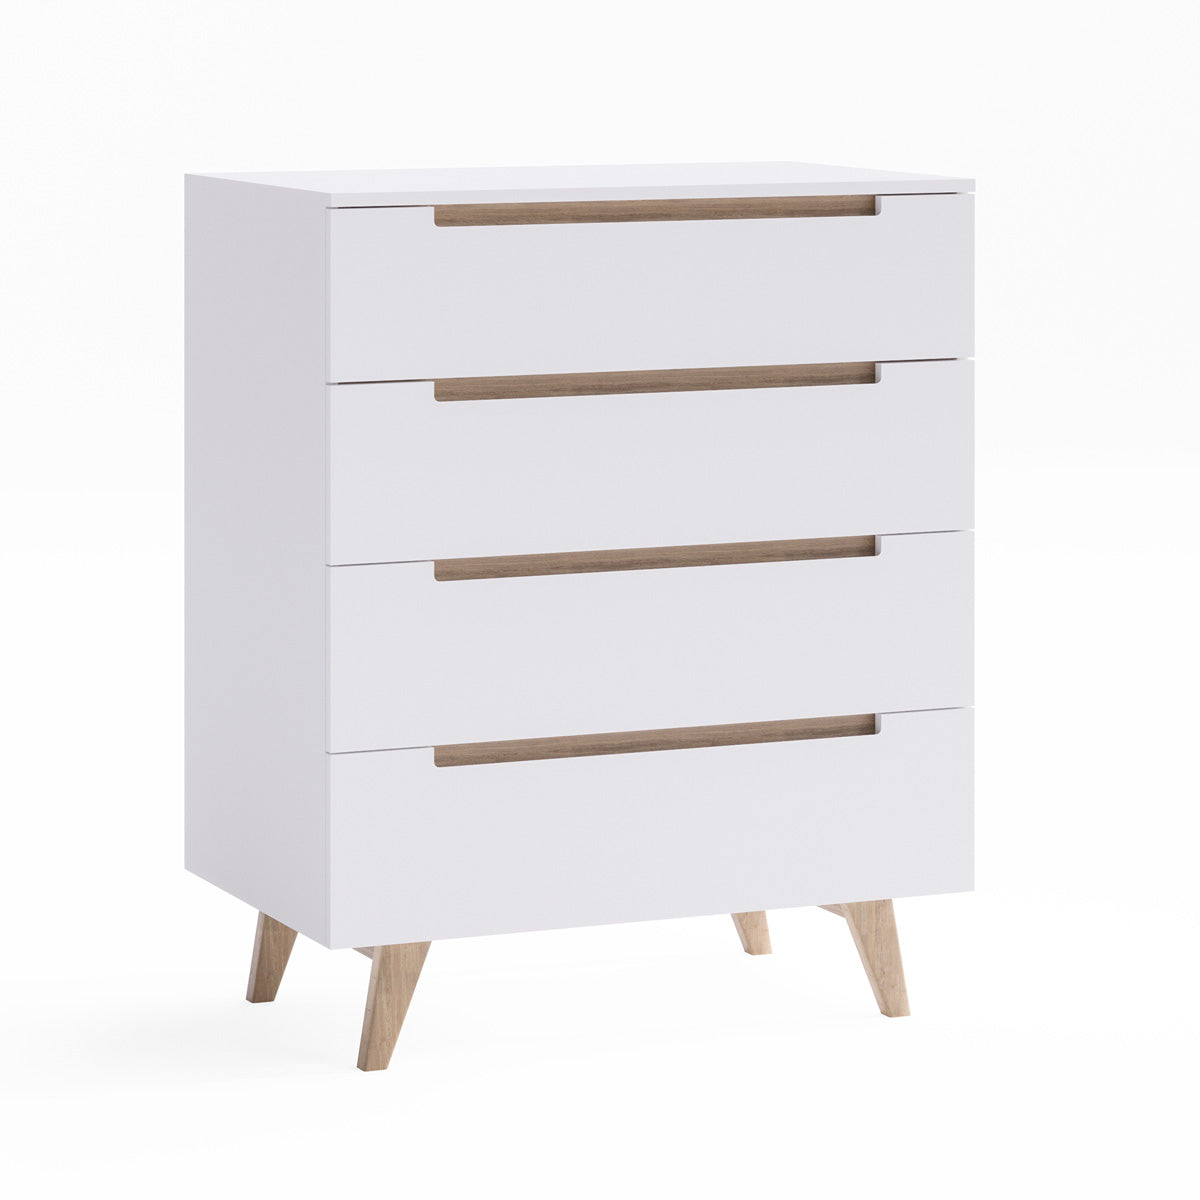 White Four Drawer Tallboy Unit with Solid Oak Legs (Olsen Collection)